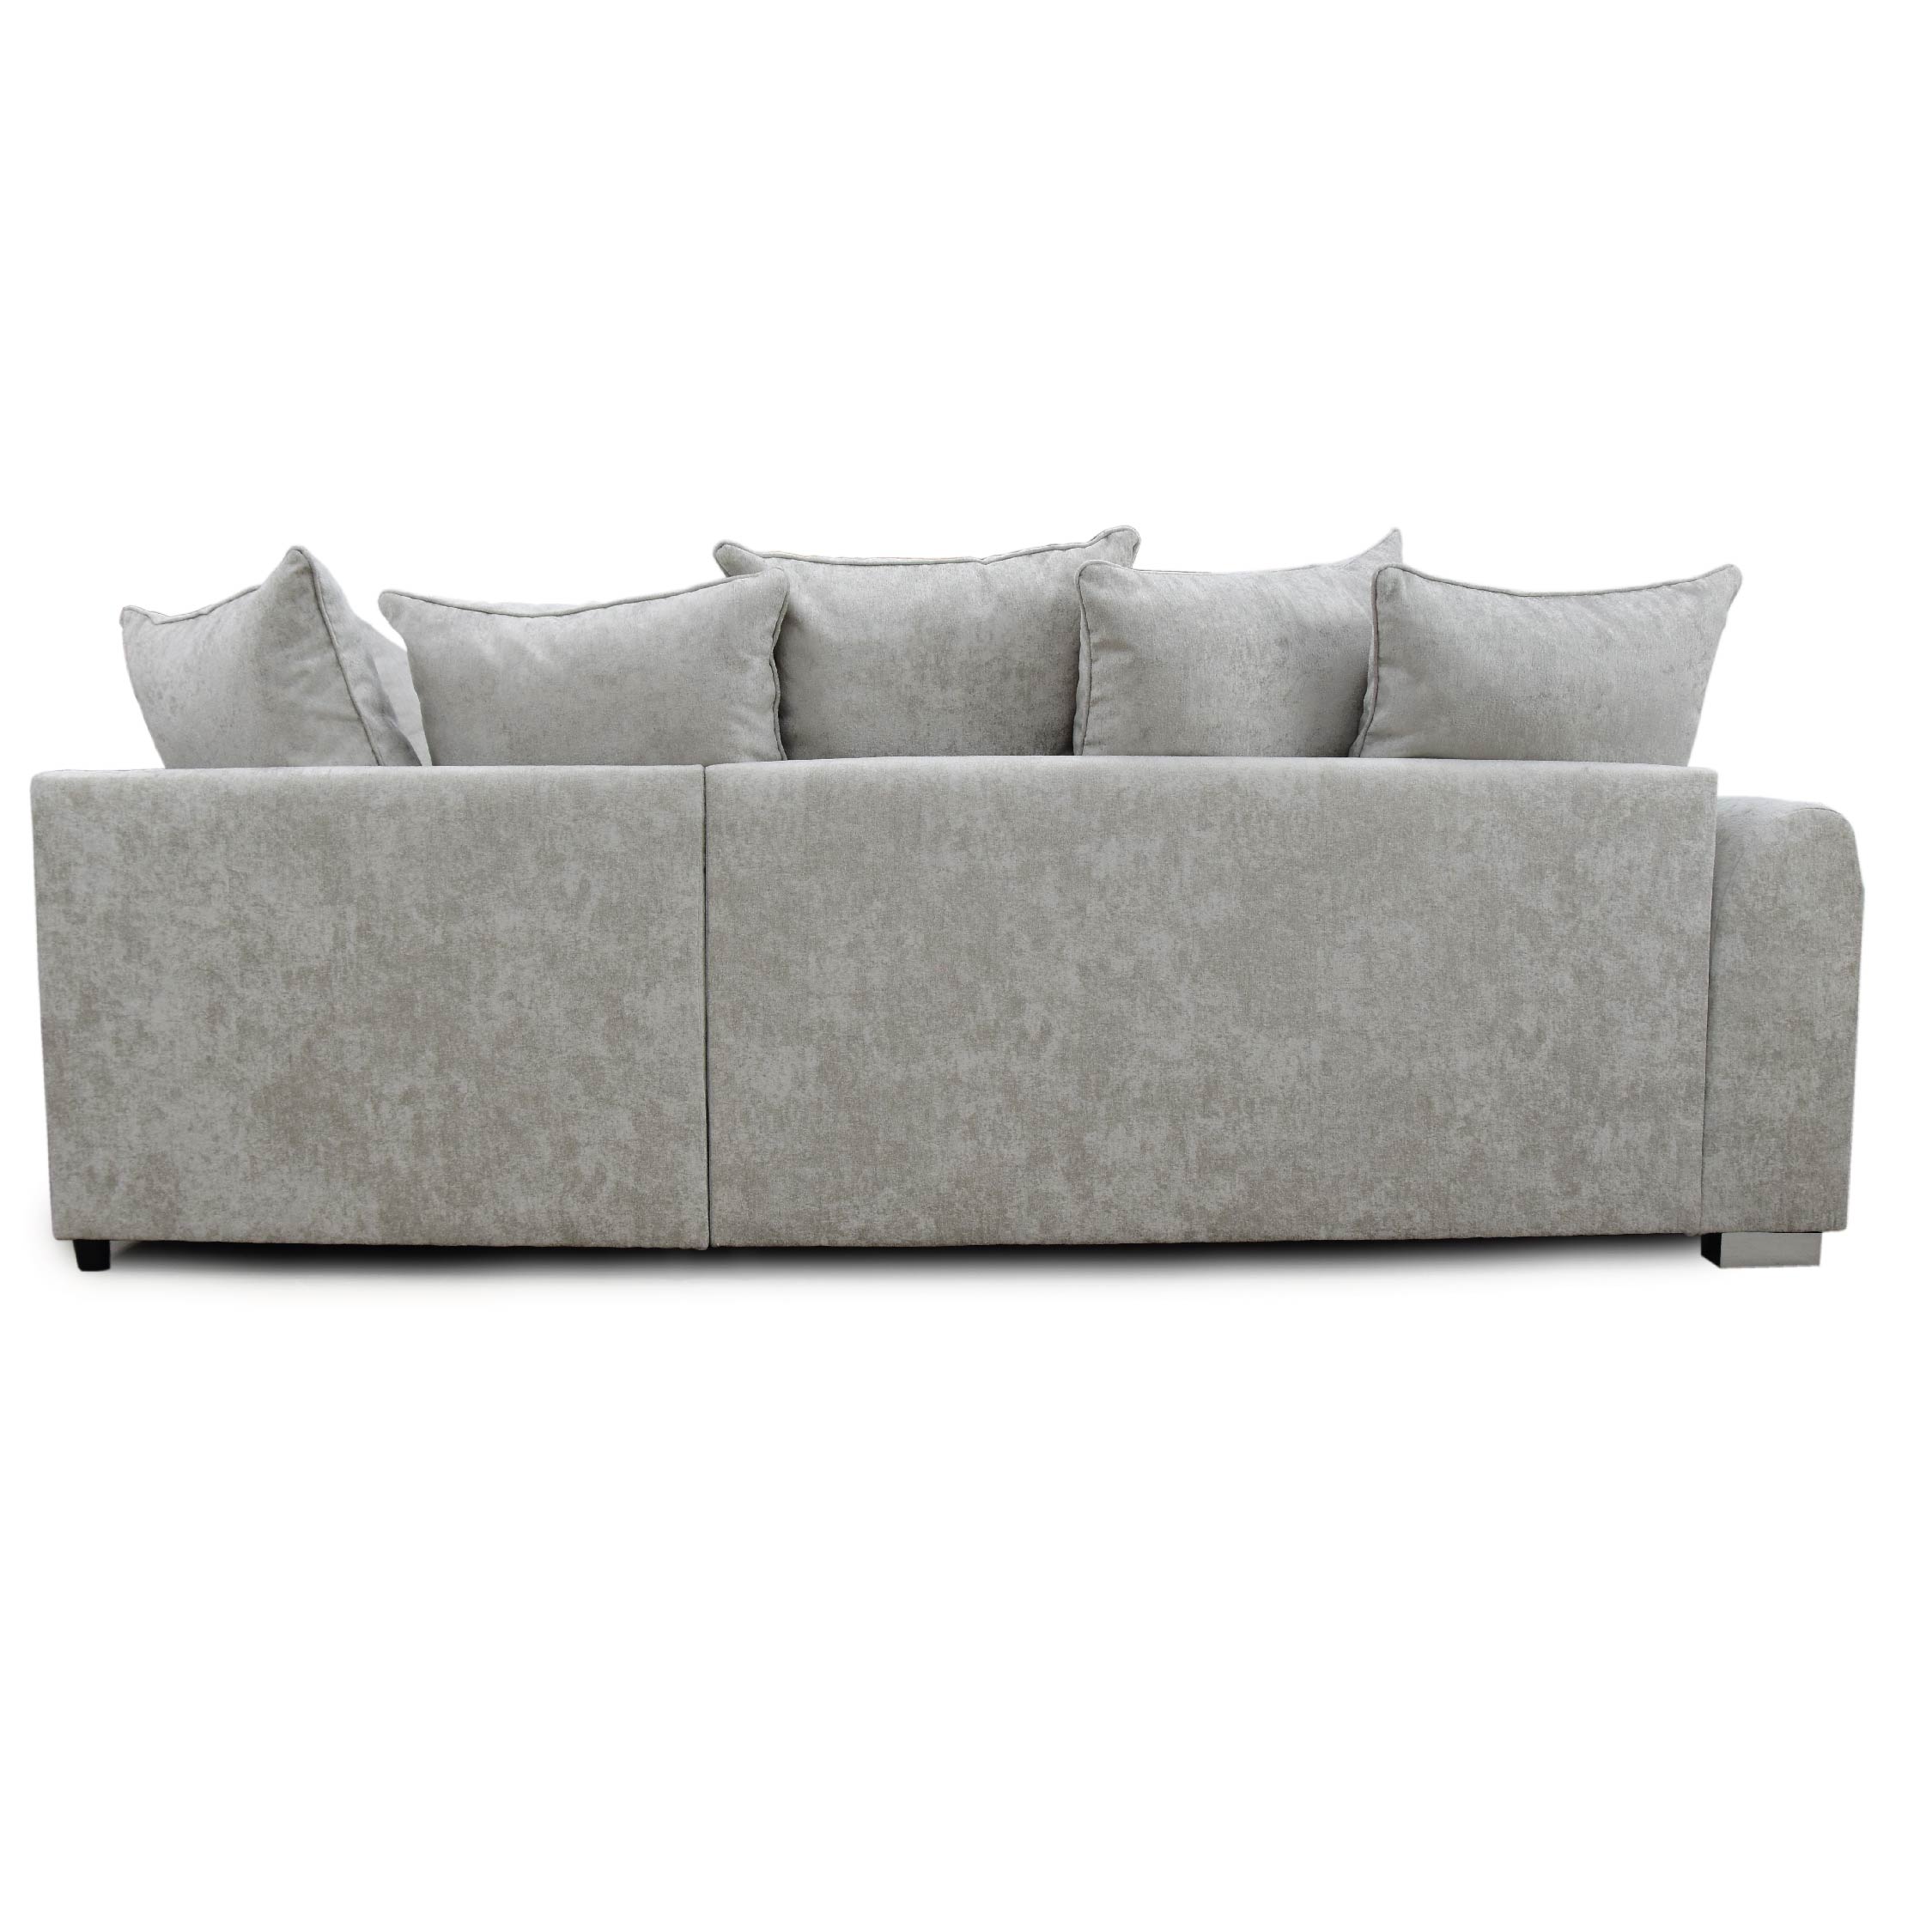 Battersea Sofa with Right Hand Facing Chaise Back View